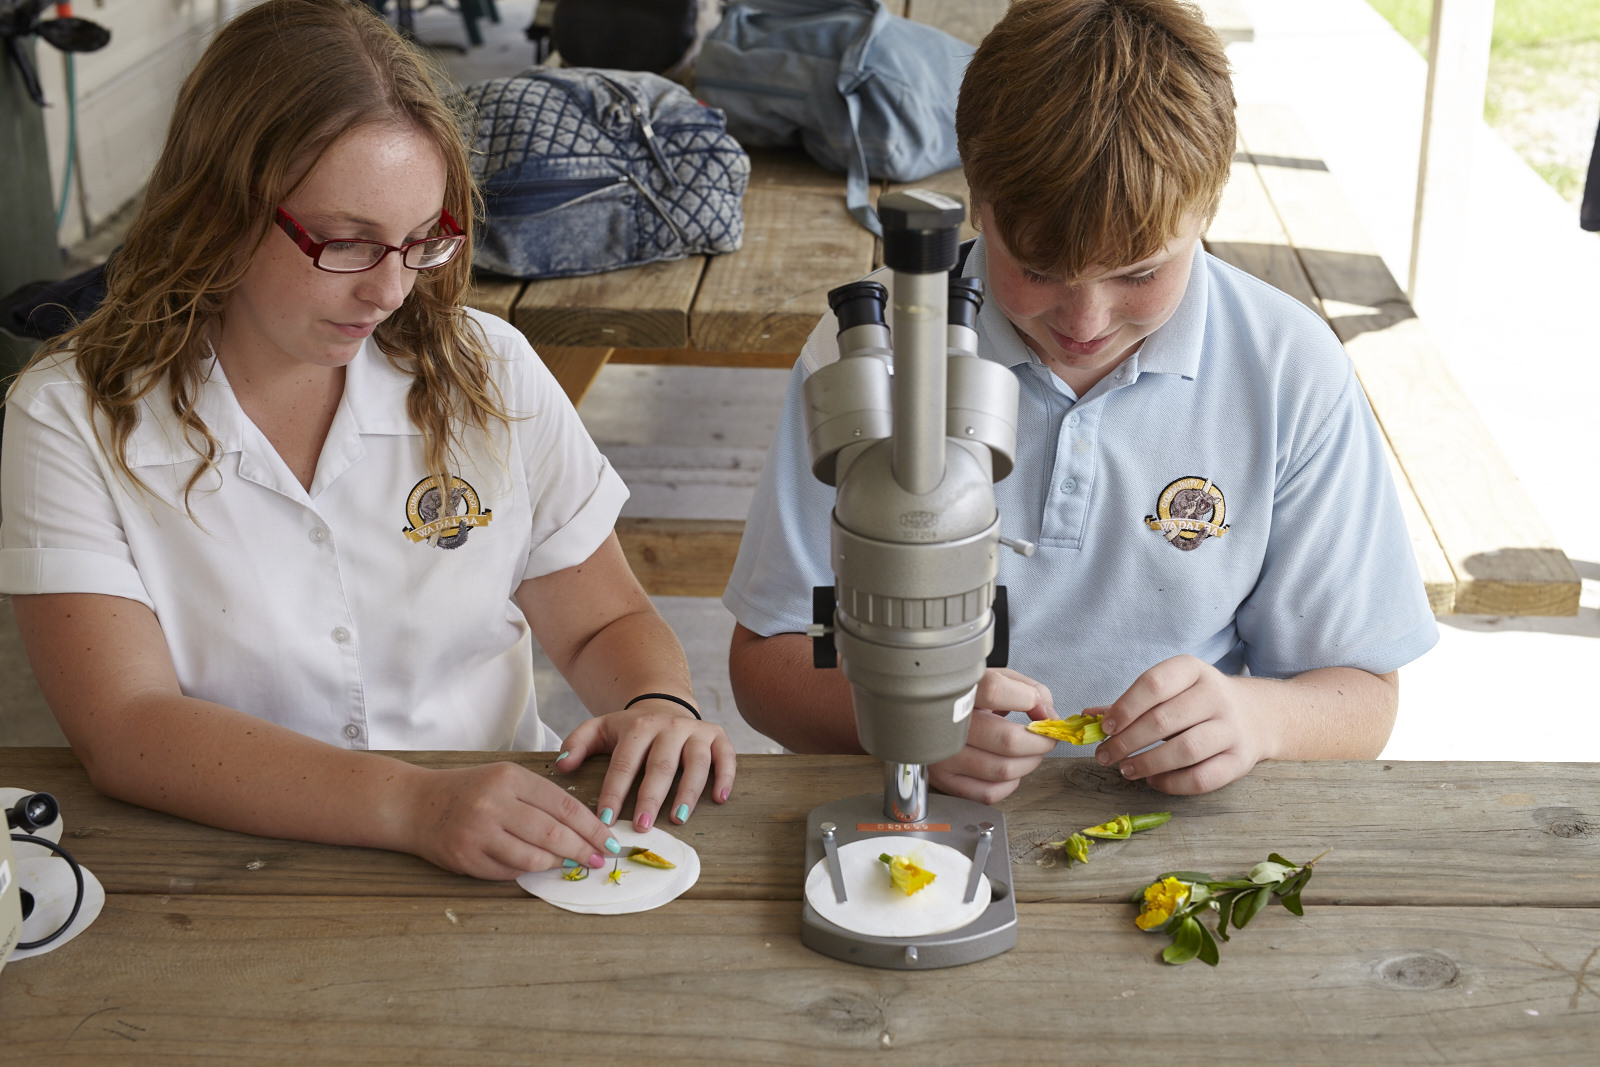 Two students are sitting at a table doing a classroom science experiment. The female student on the right is looking at the pollen of a plant on a circular white sheet of paper. The male student on the left has a microscope in front of him and he is prepping a plant to view under the microscope.